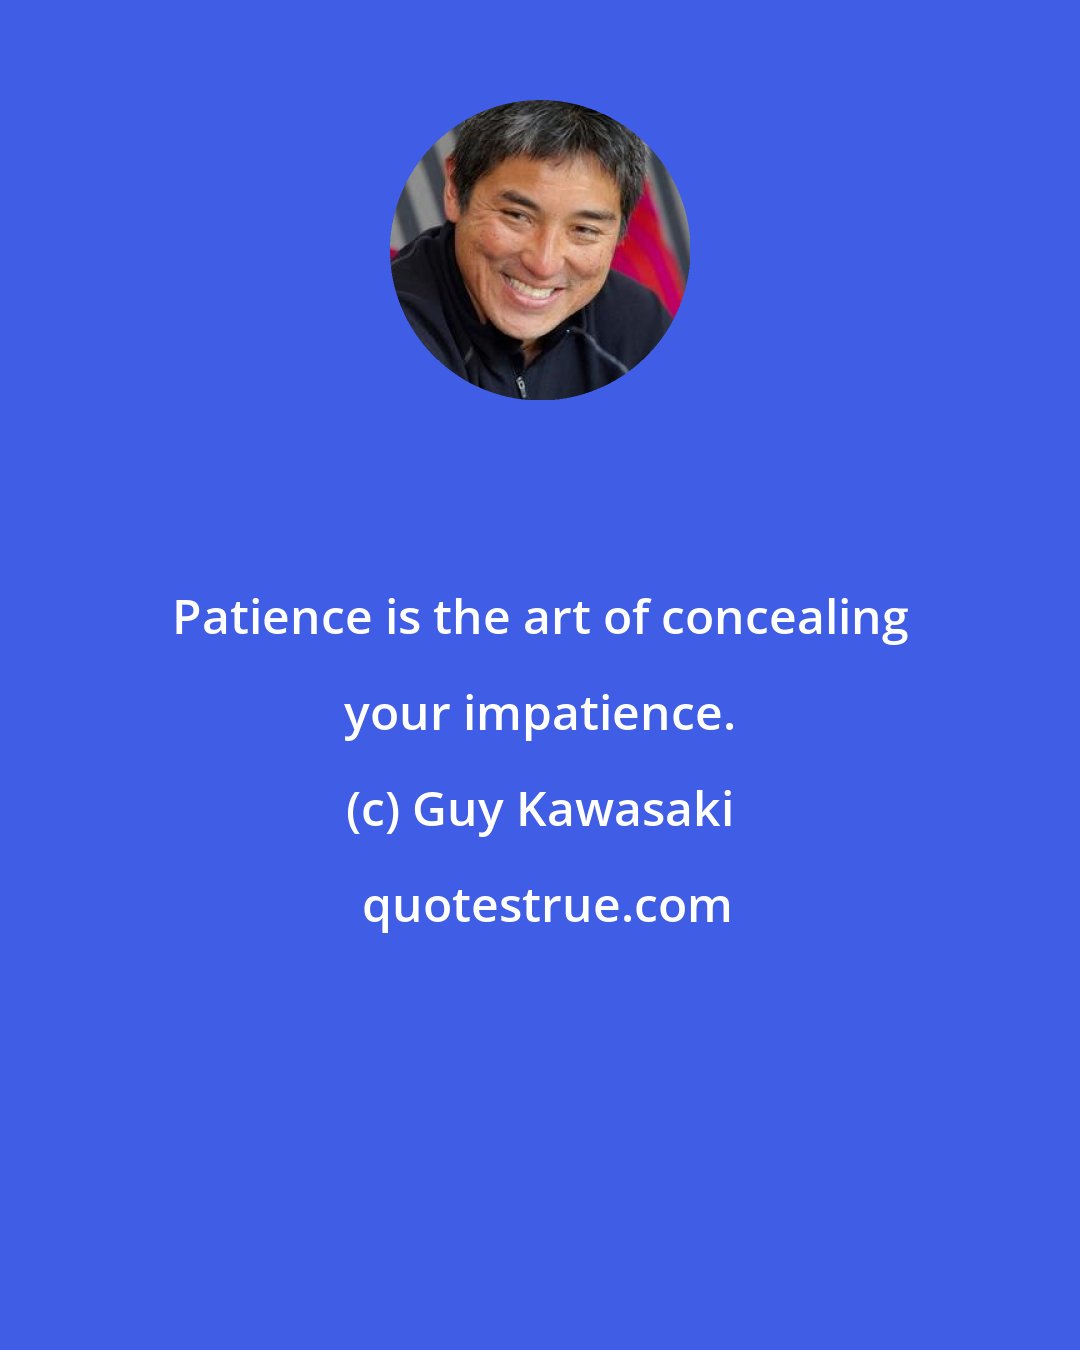 Guy Kawasaki: Patience is the art of concealing your impatience.